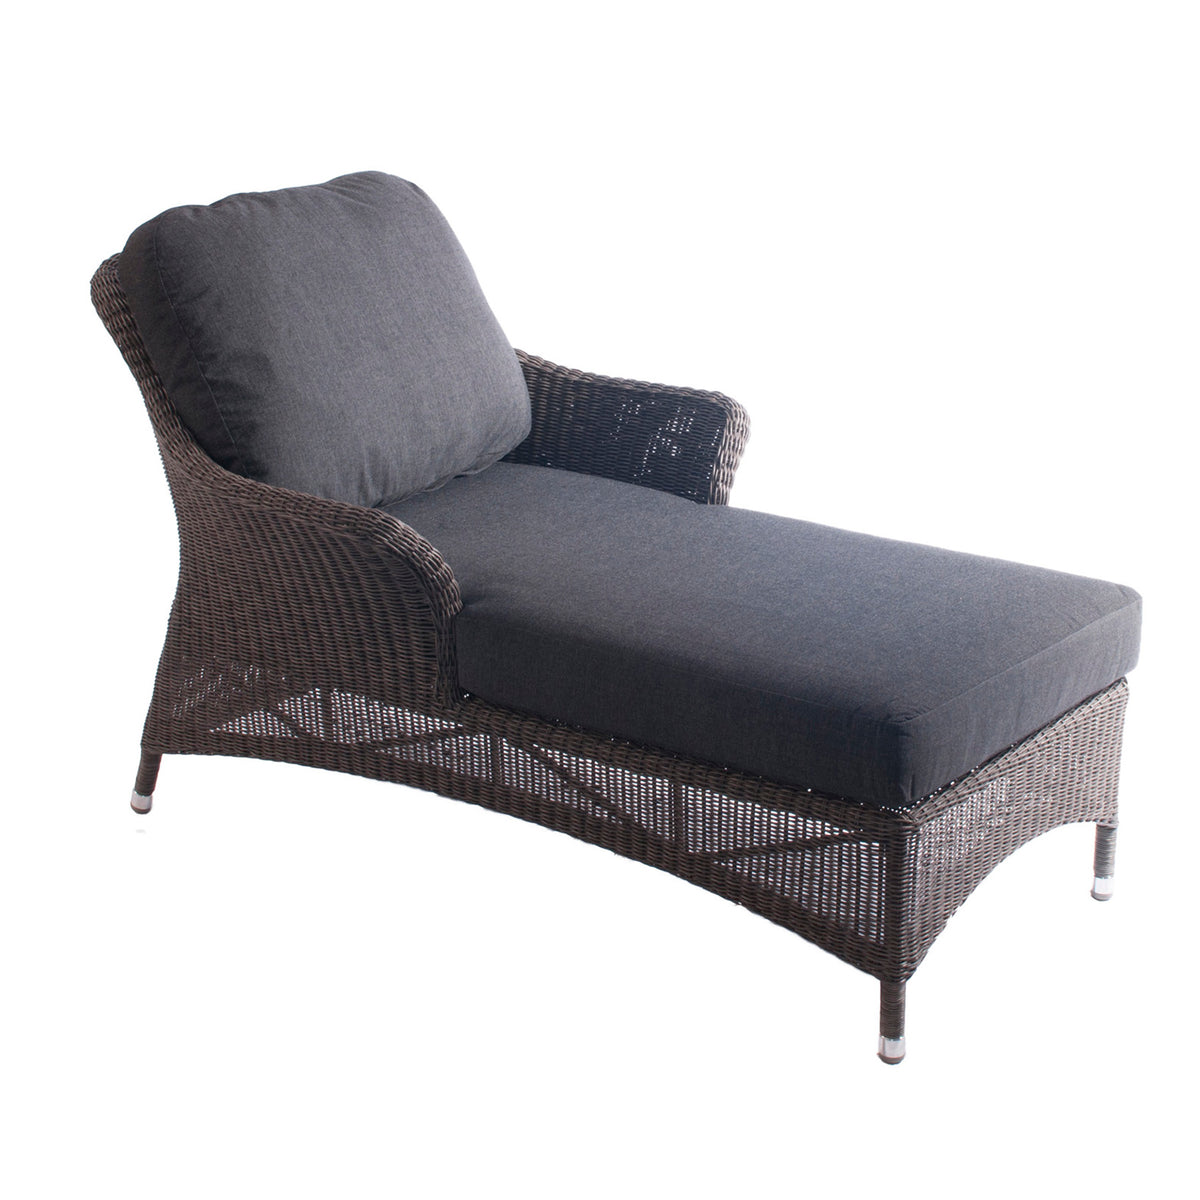 Alexander Rose Monte Carlo Relax Sunlounger with Charcoal Cushion